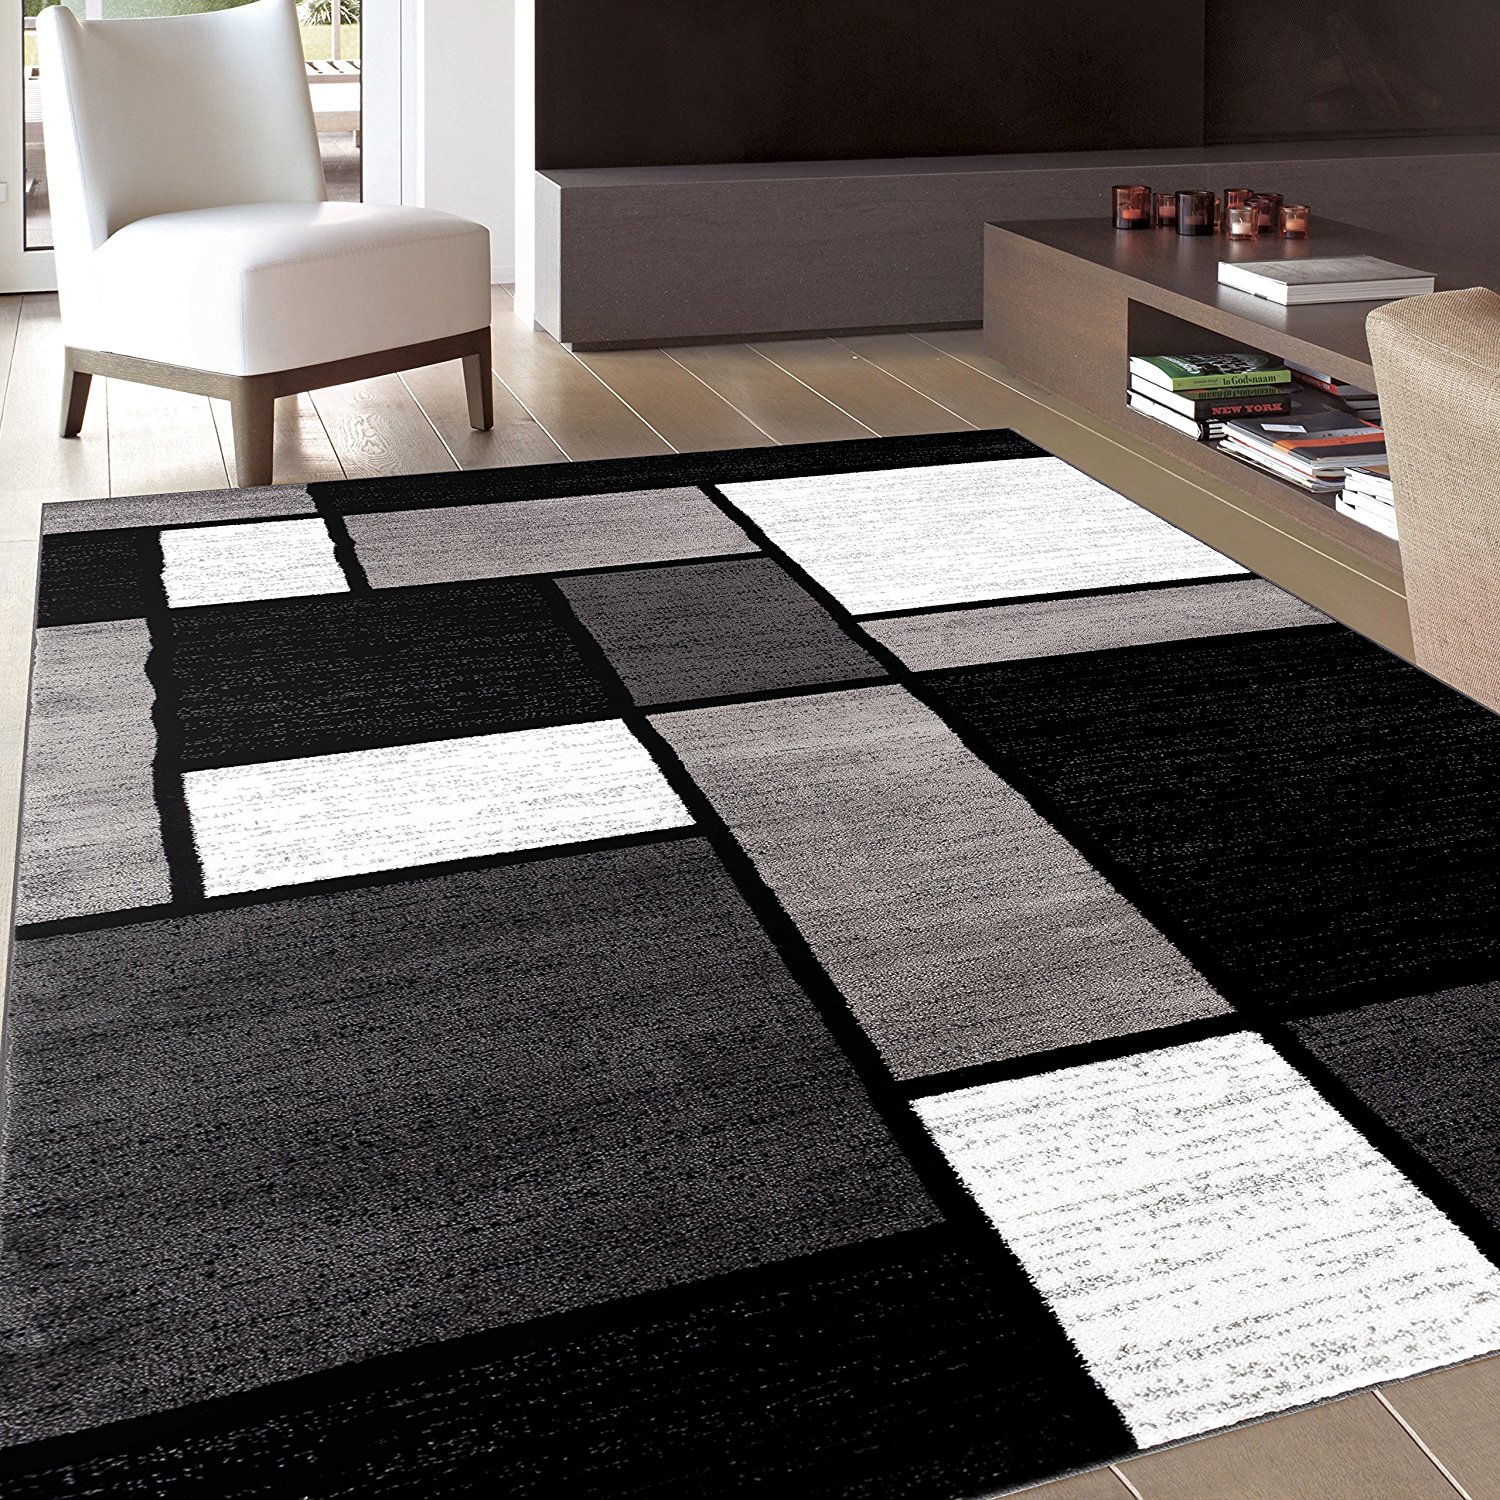 contemporary area rugs black and white area rugs amazon.com: rug decor contemporary modern boxes area OOQVKEL